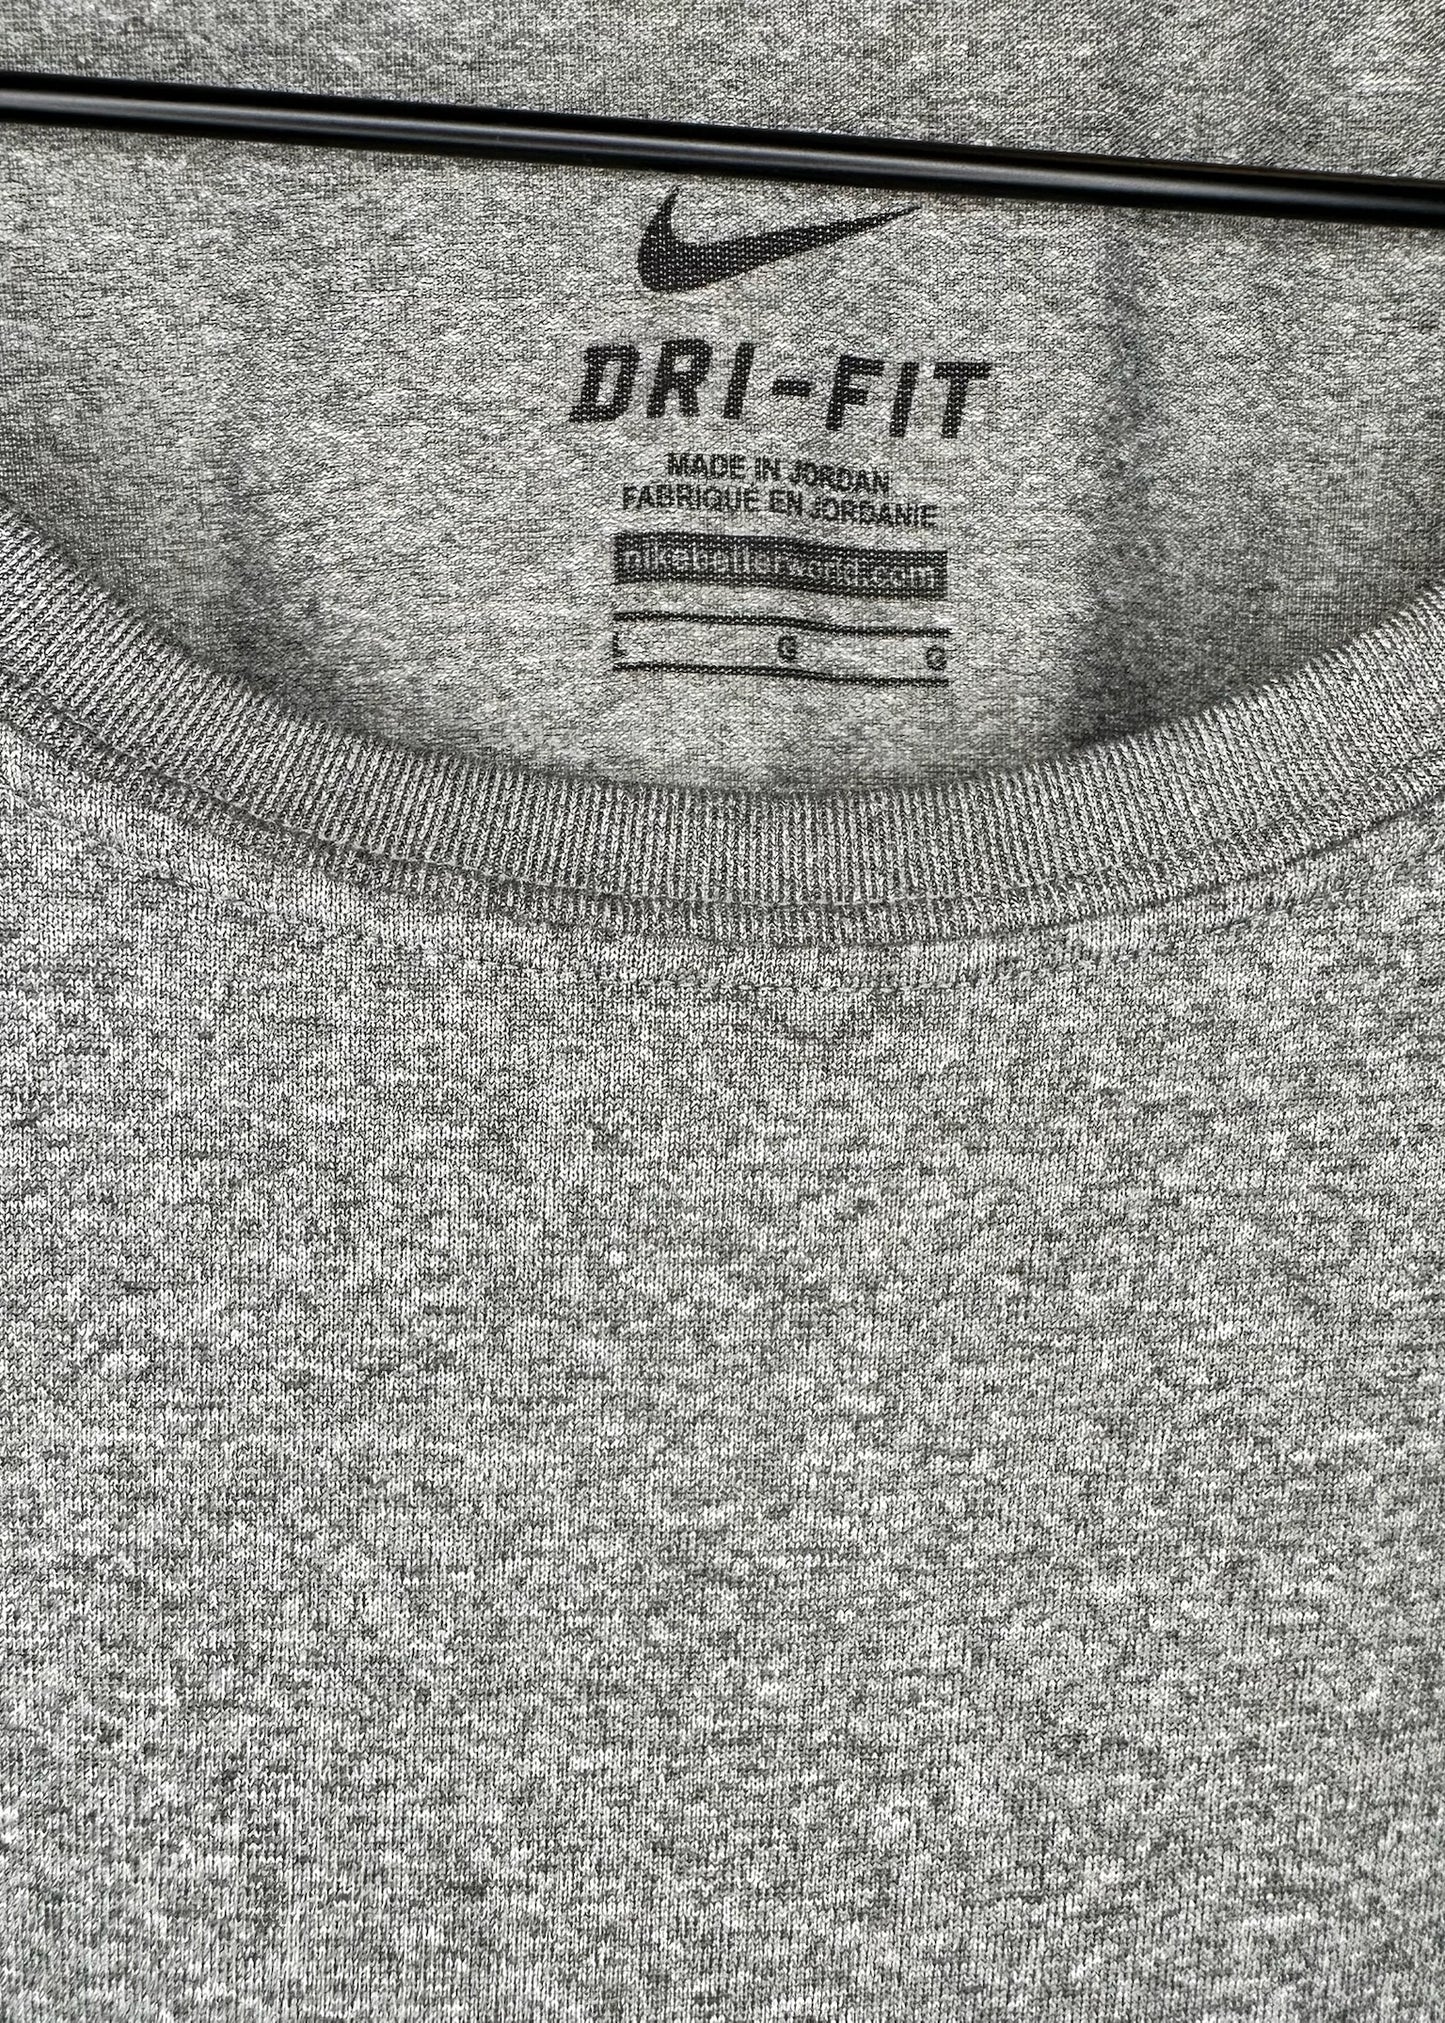 Grey Dry-Fit Shirt By Nike